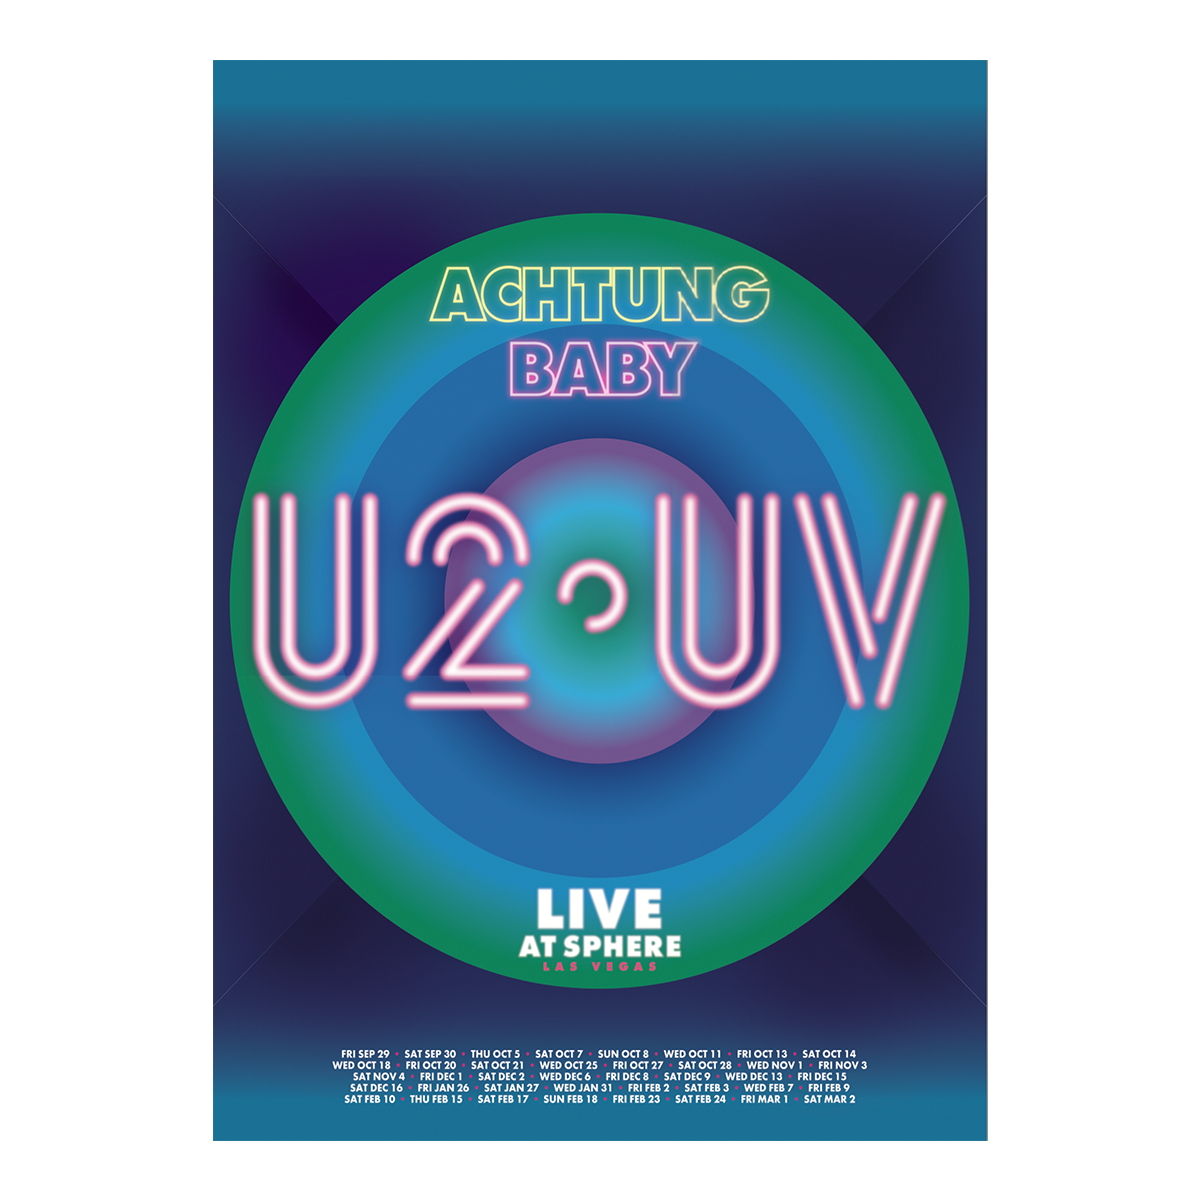 U2 UV Achtung Baby Live At Sphere Poster